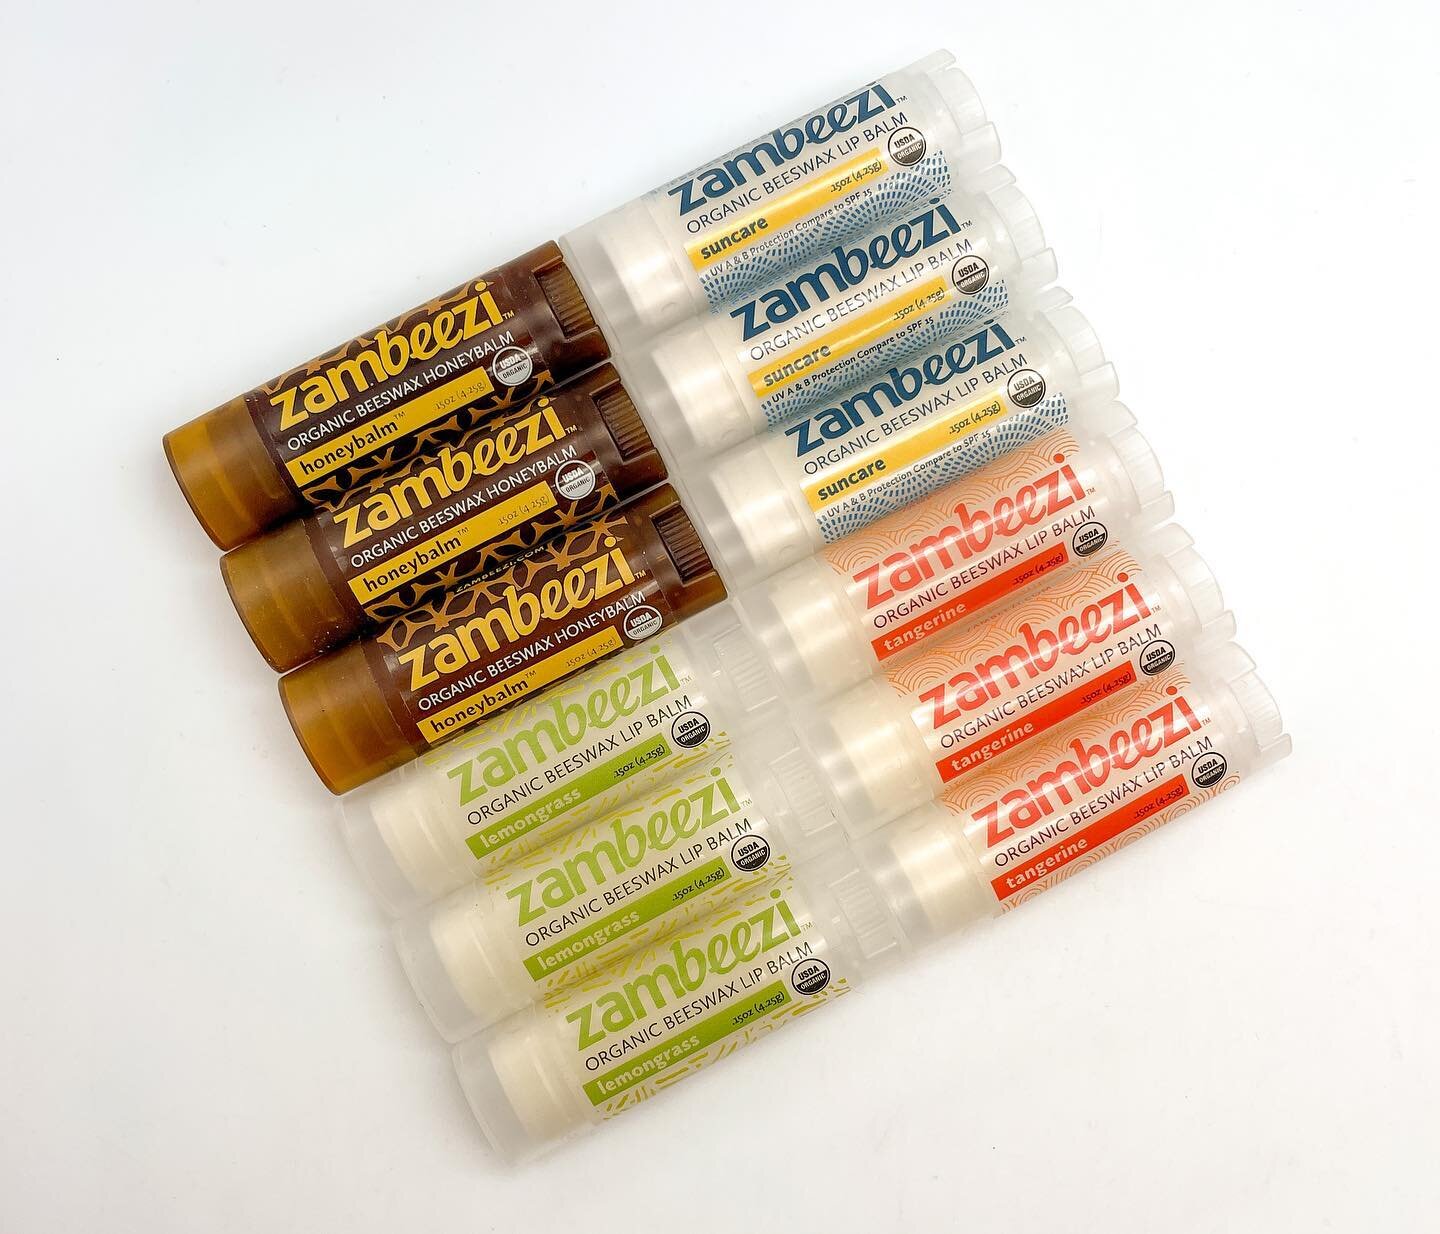 Have you ever tried Zambeezi lip balm? 

Zambeezi partners with entrepreneurs, beekeepers and farmers in Zambia, Africa, where they craft ethically sourced, organic, fair trade body care products.

Unlike other brands, Zambeezi focuses on clean and s